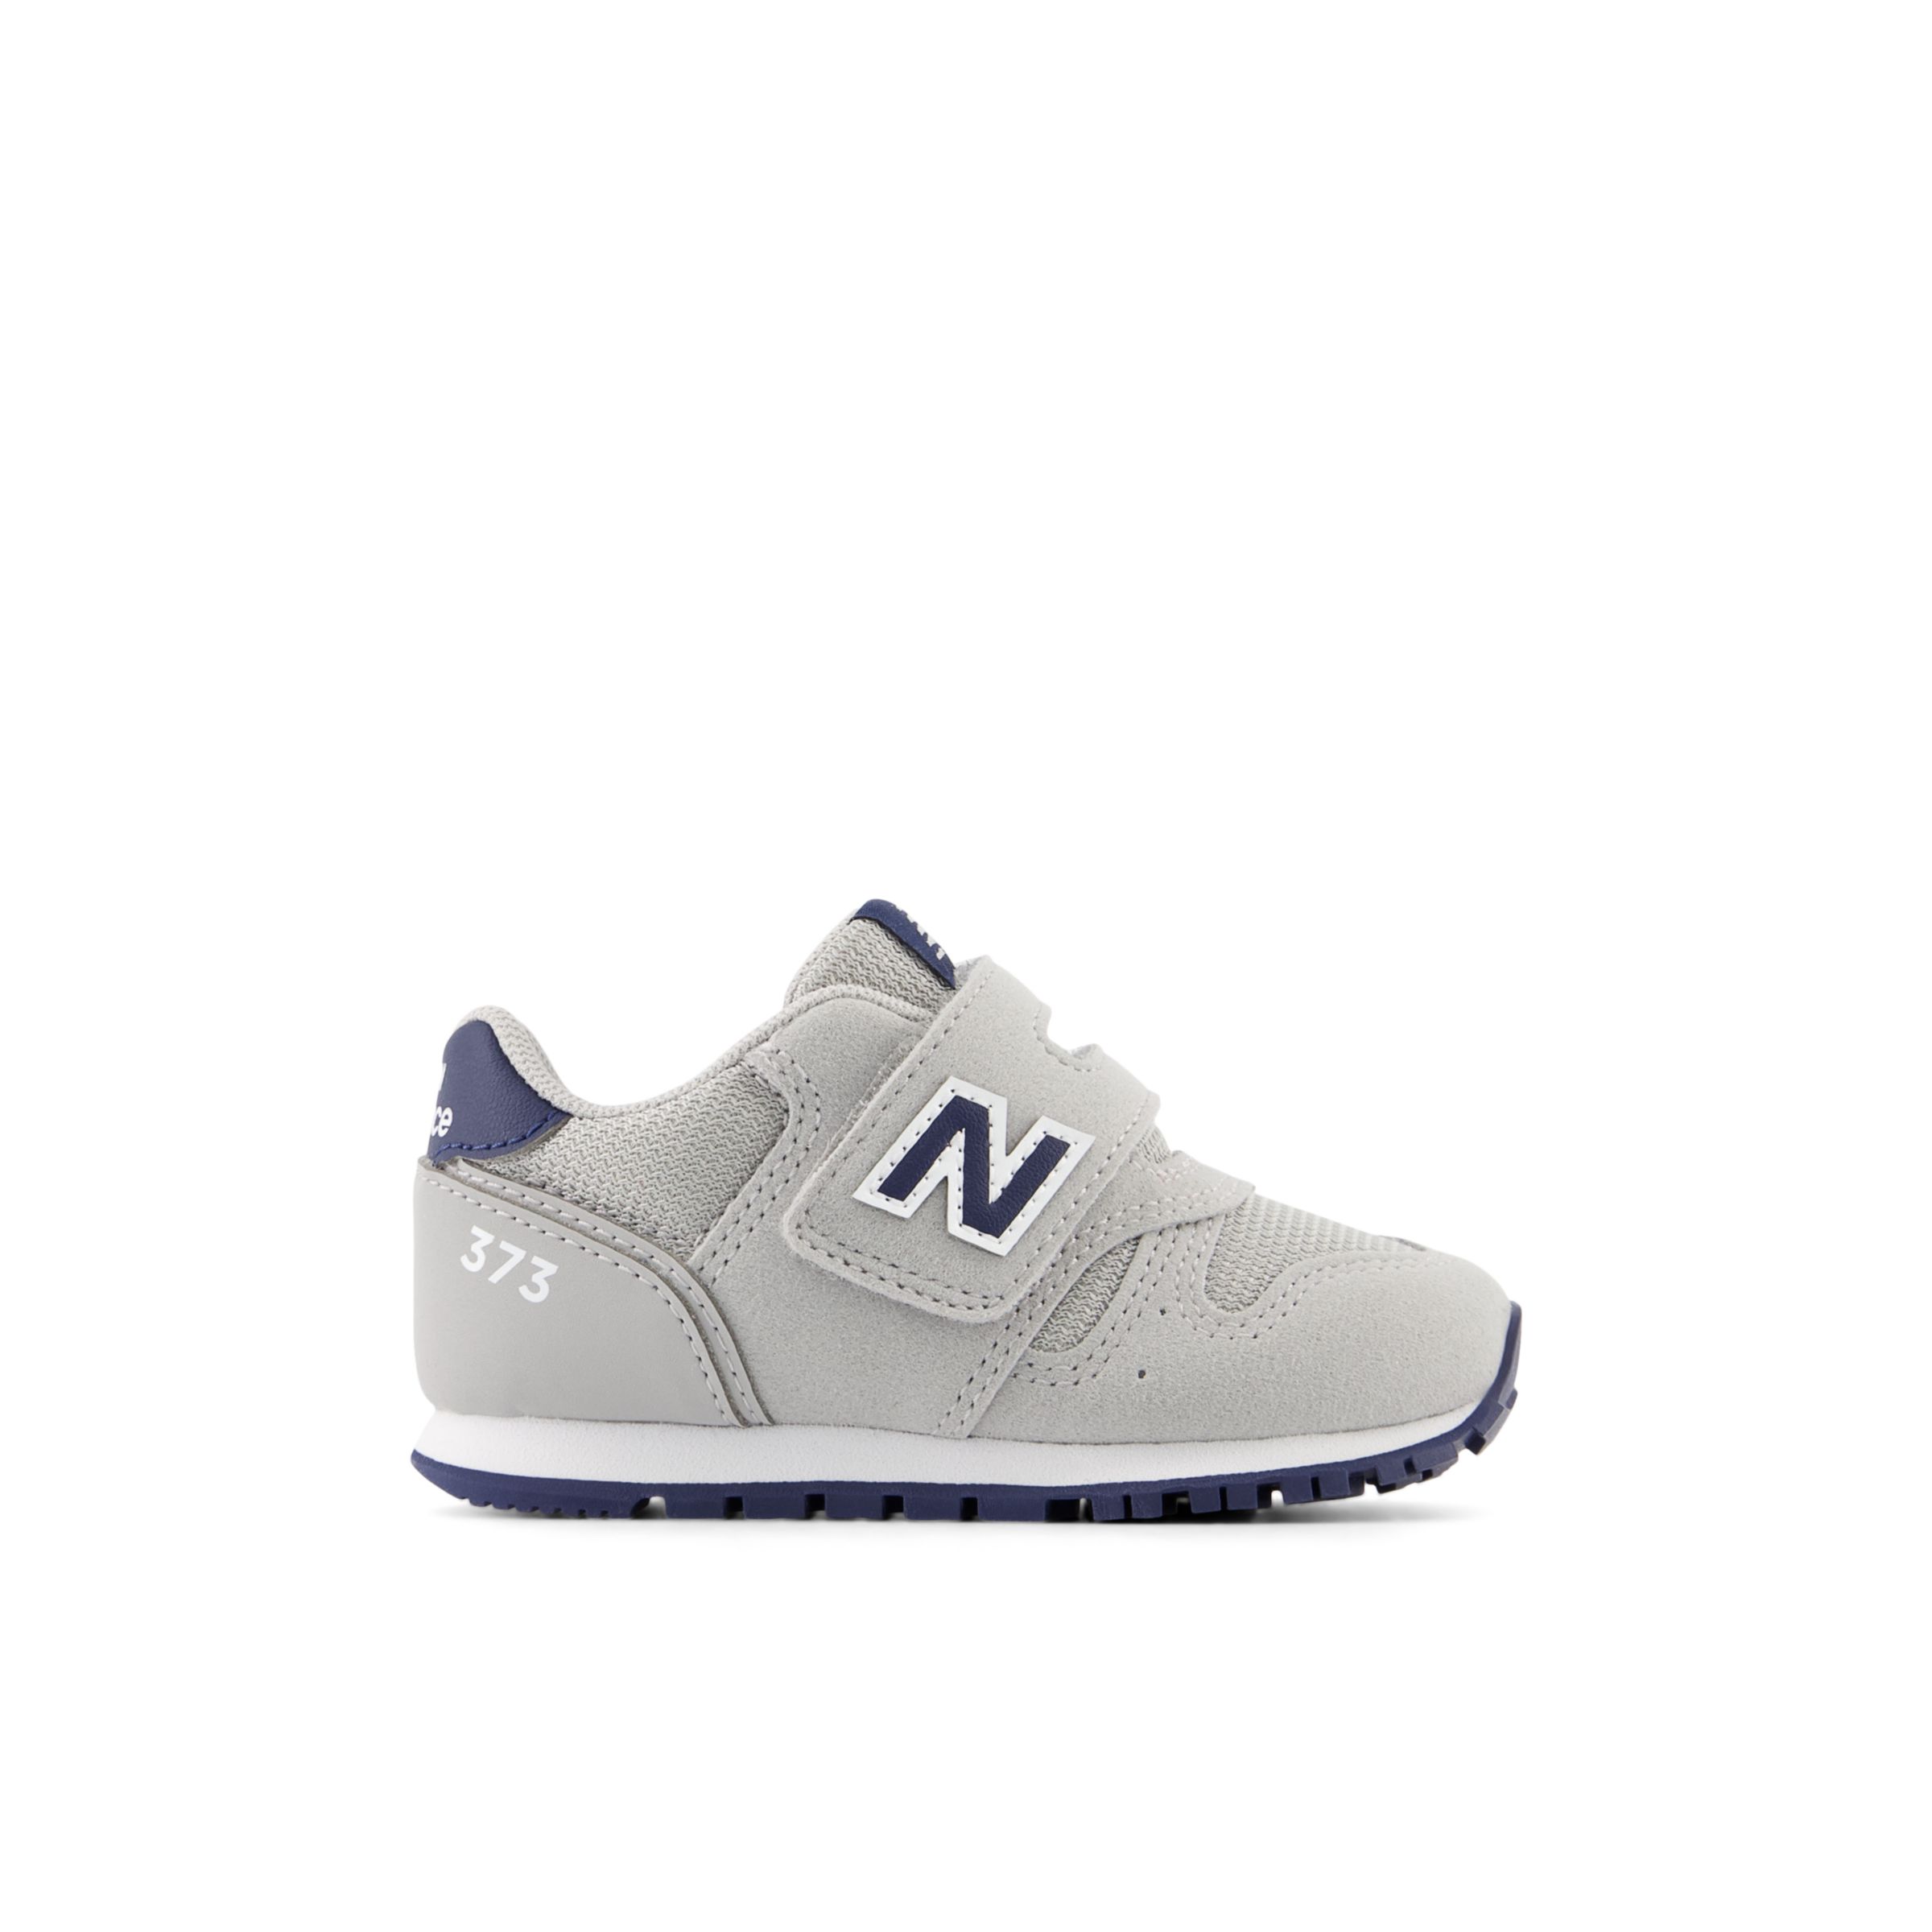 New Balance Kids' 373 Hook and Loop en Gris/Bleu, Synthetic, Taille 24